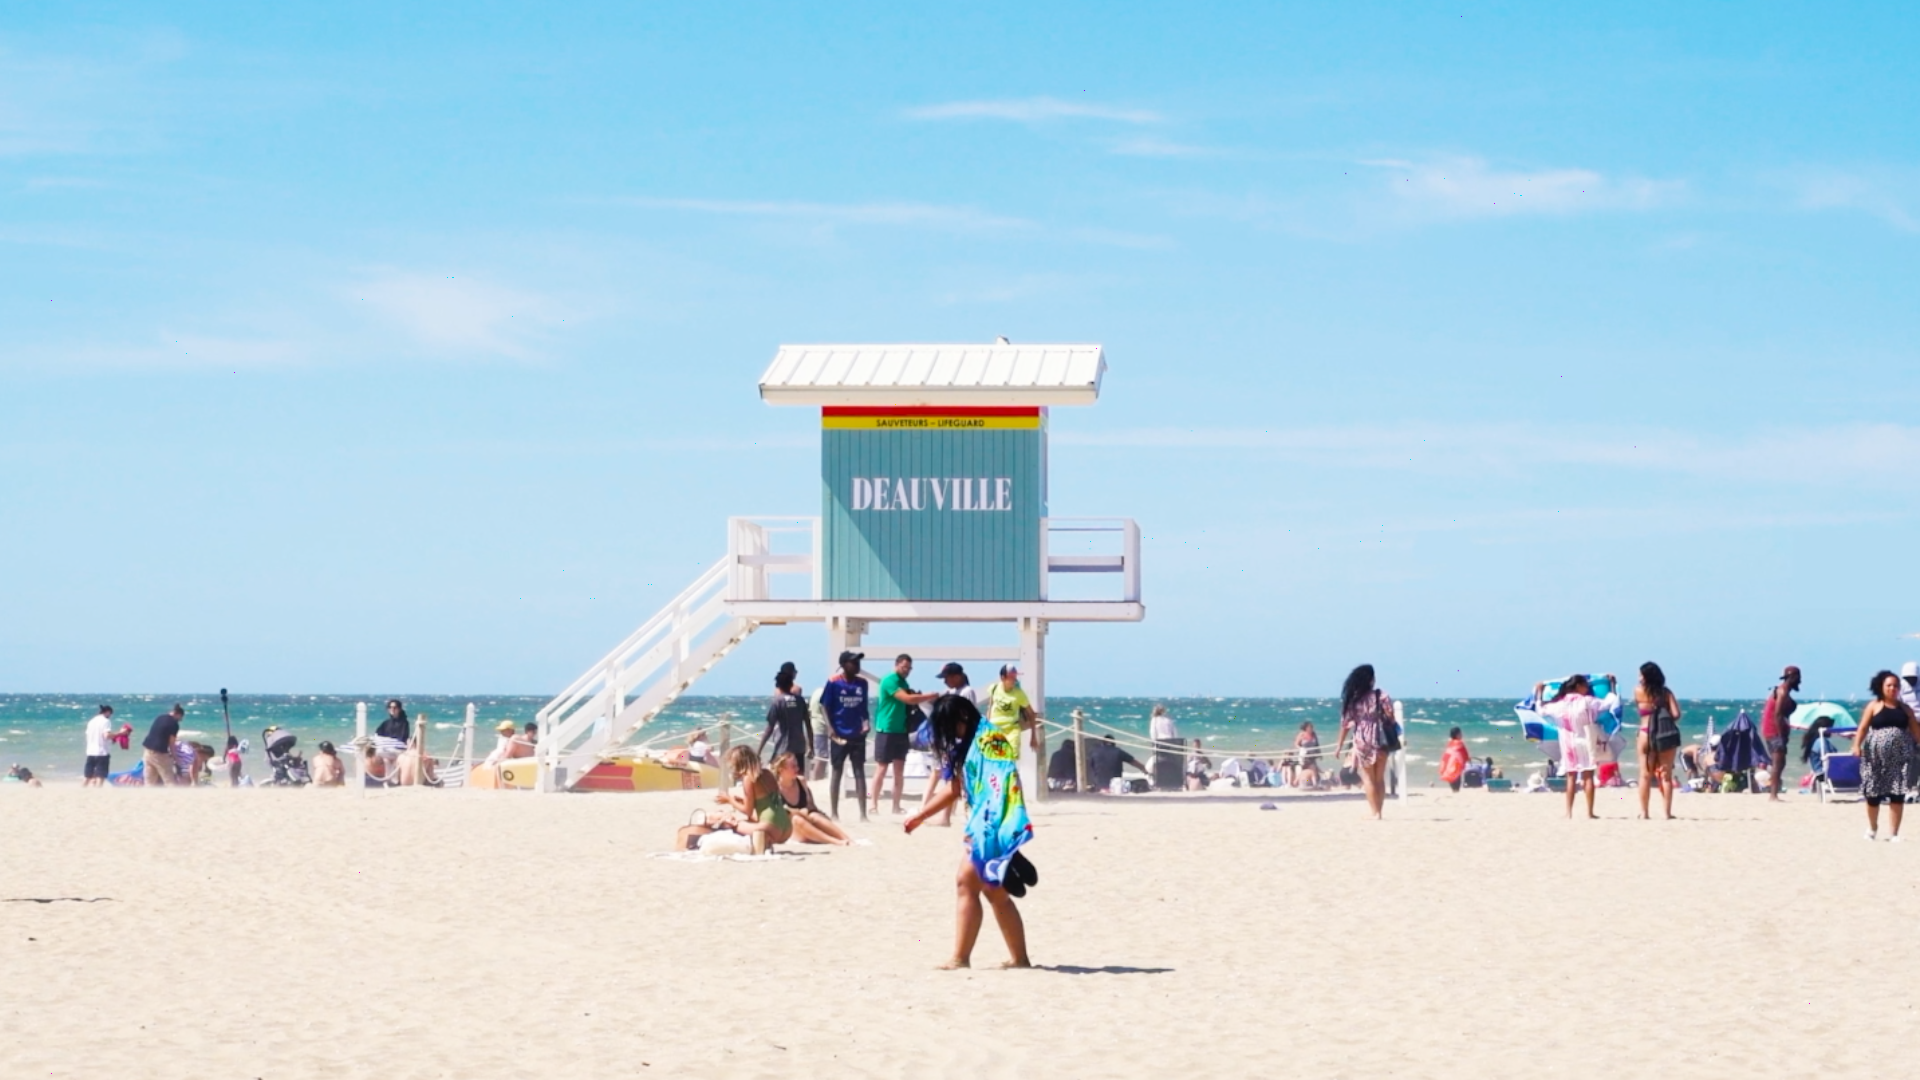 Deauville: Unrivaled charm of the French coast